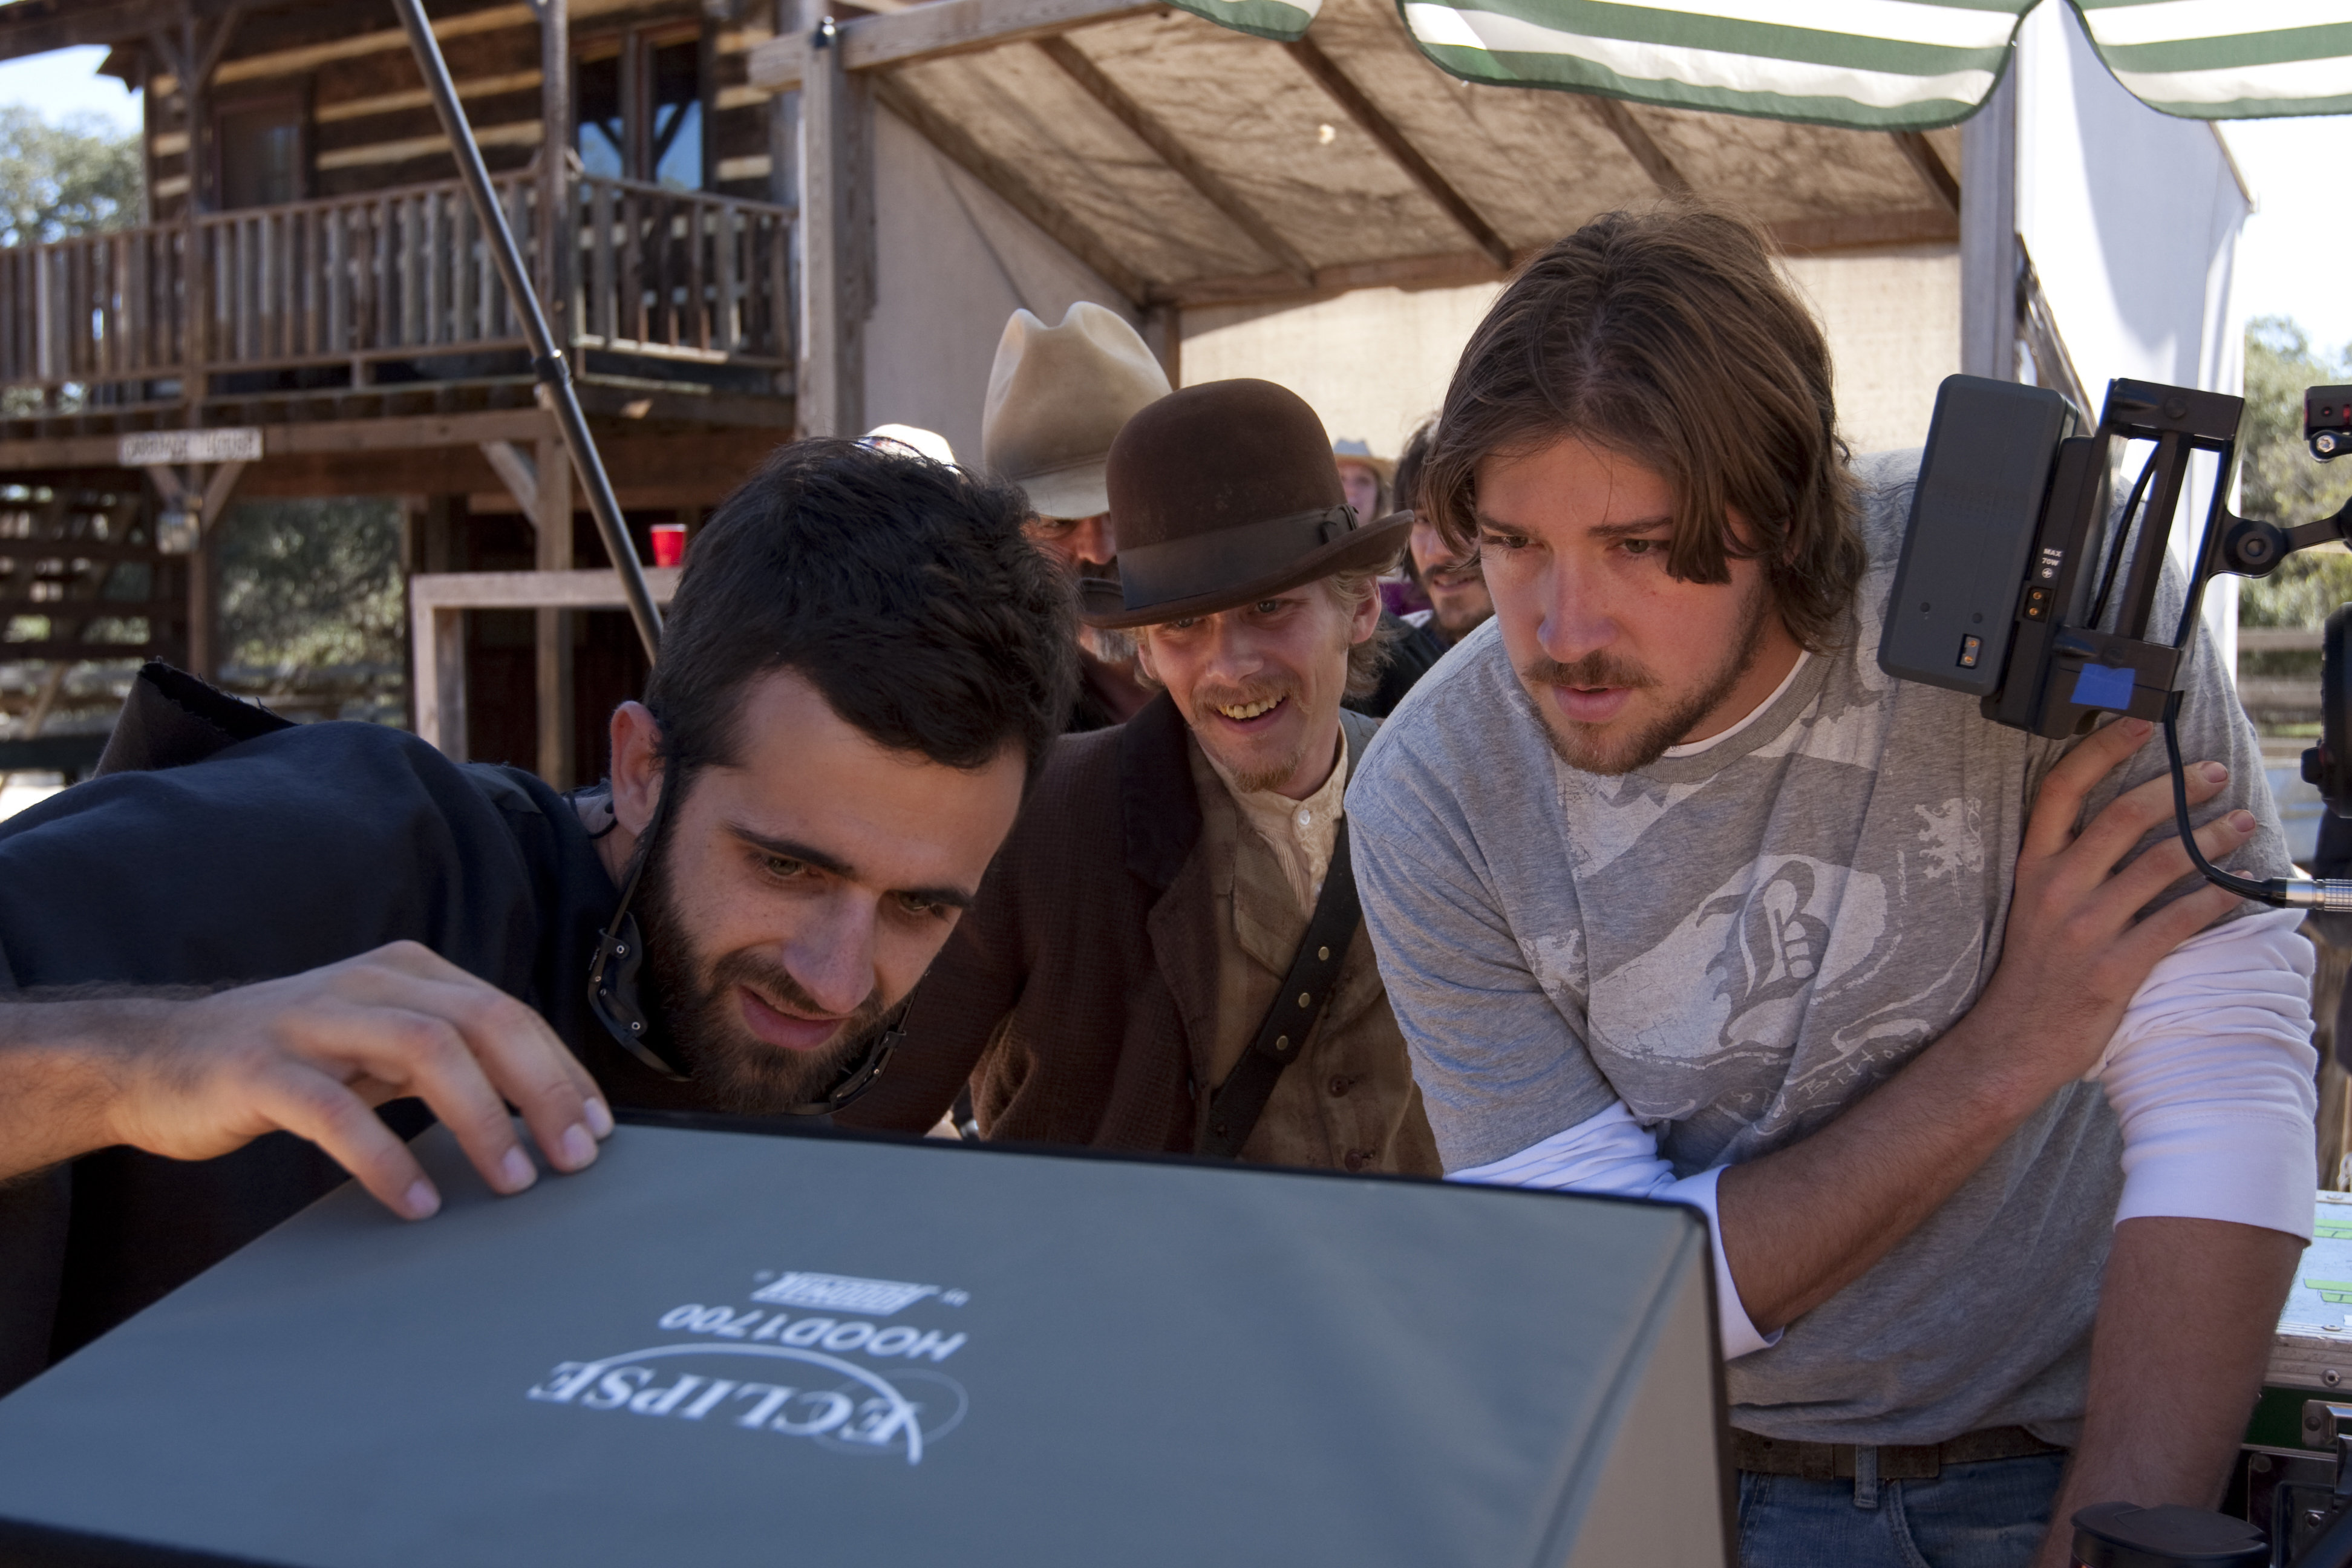 Director Tanner Beard watches playback with Director of Photography Nathanael Vorce and Actor Lou Taylor Pucci.